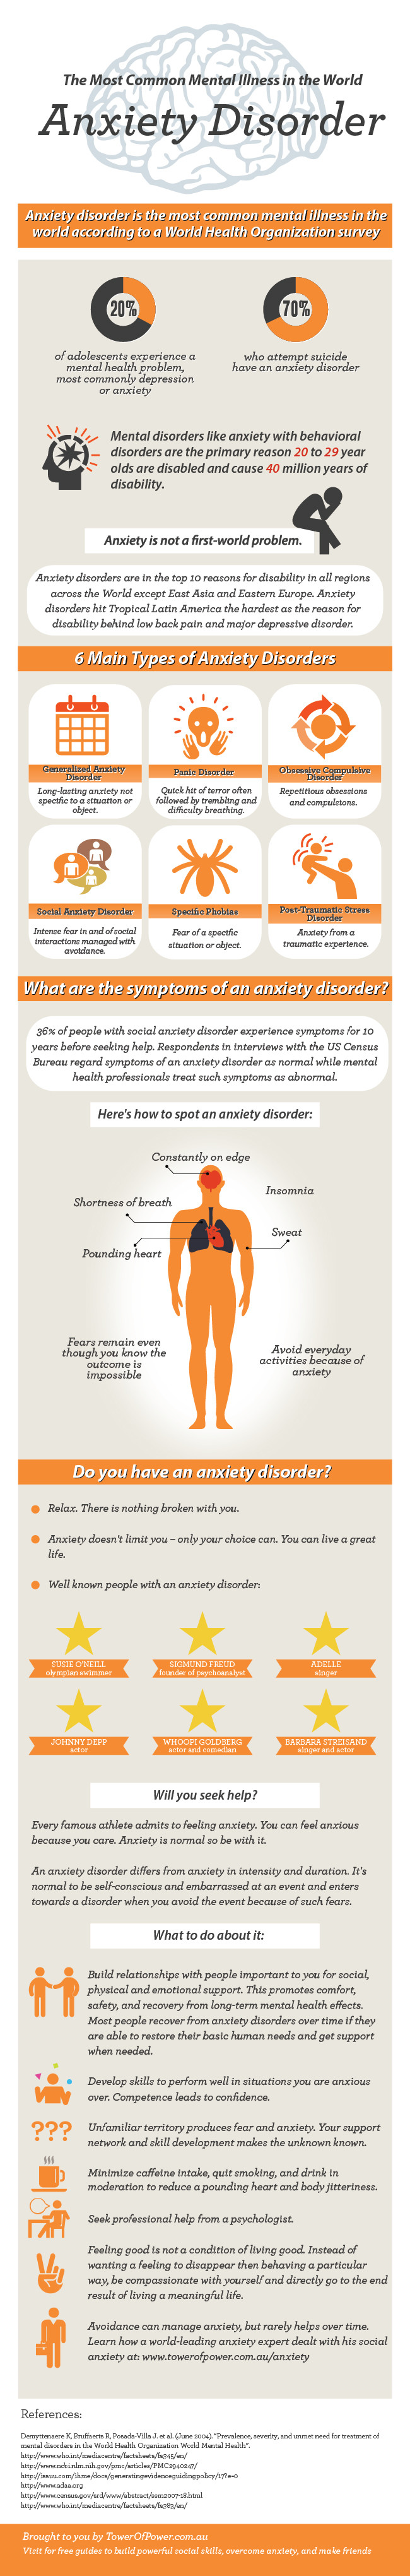 anxiety-disordernewinfographic